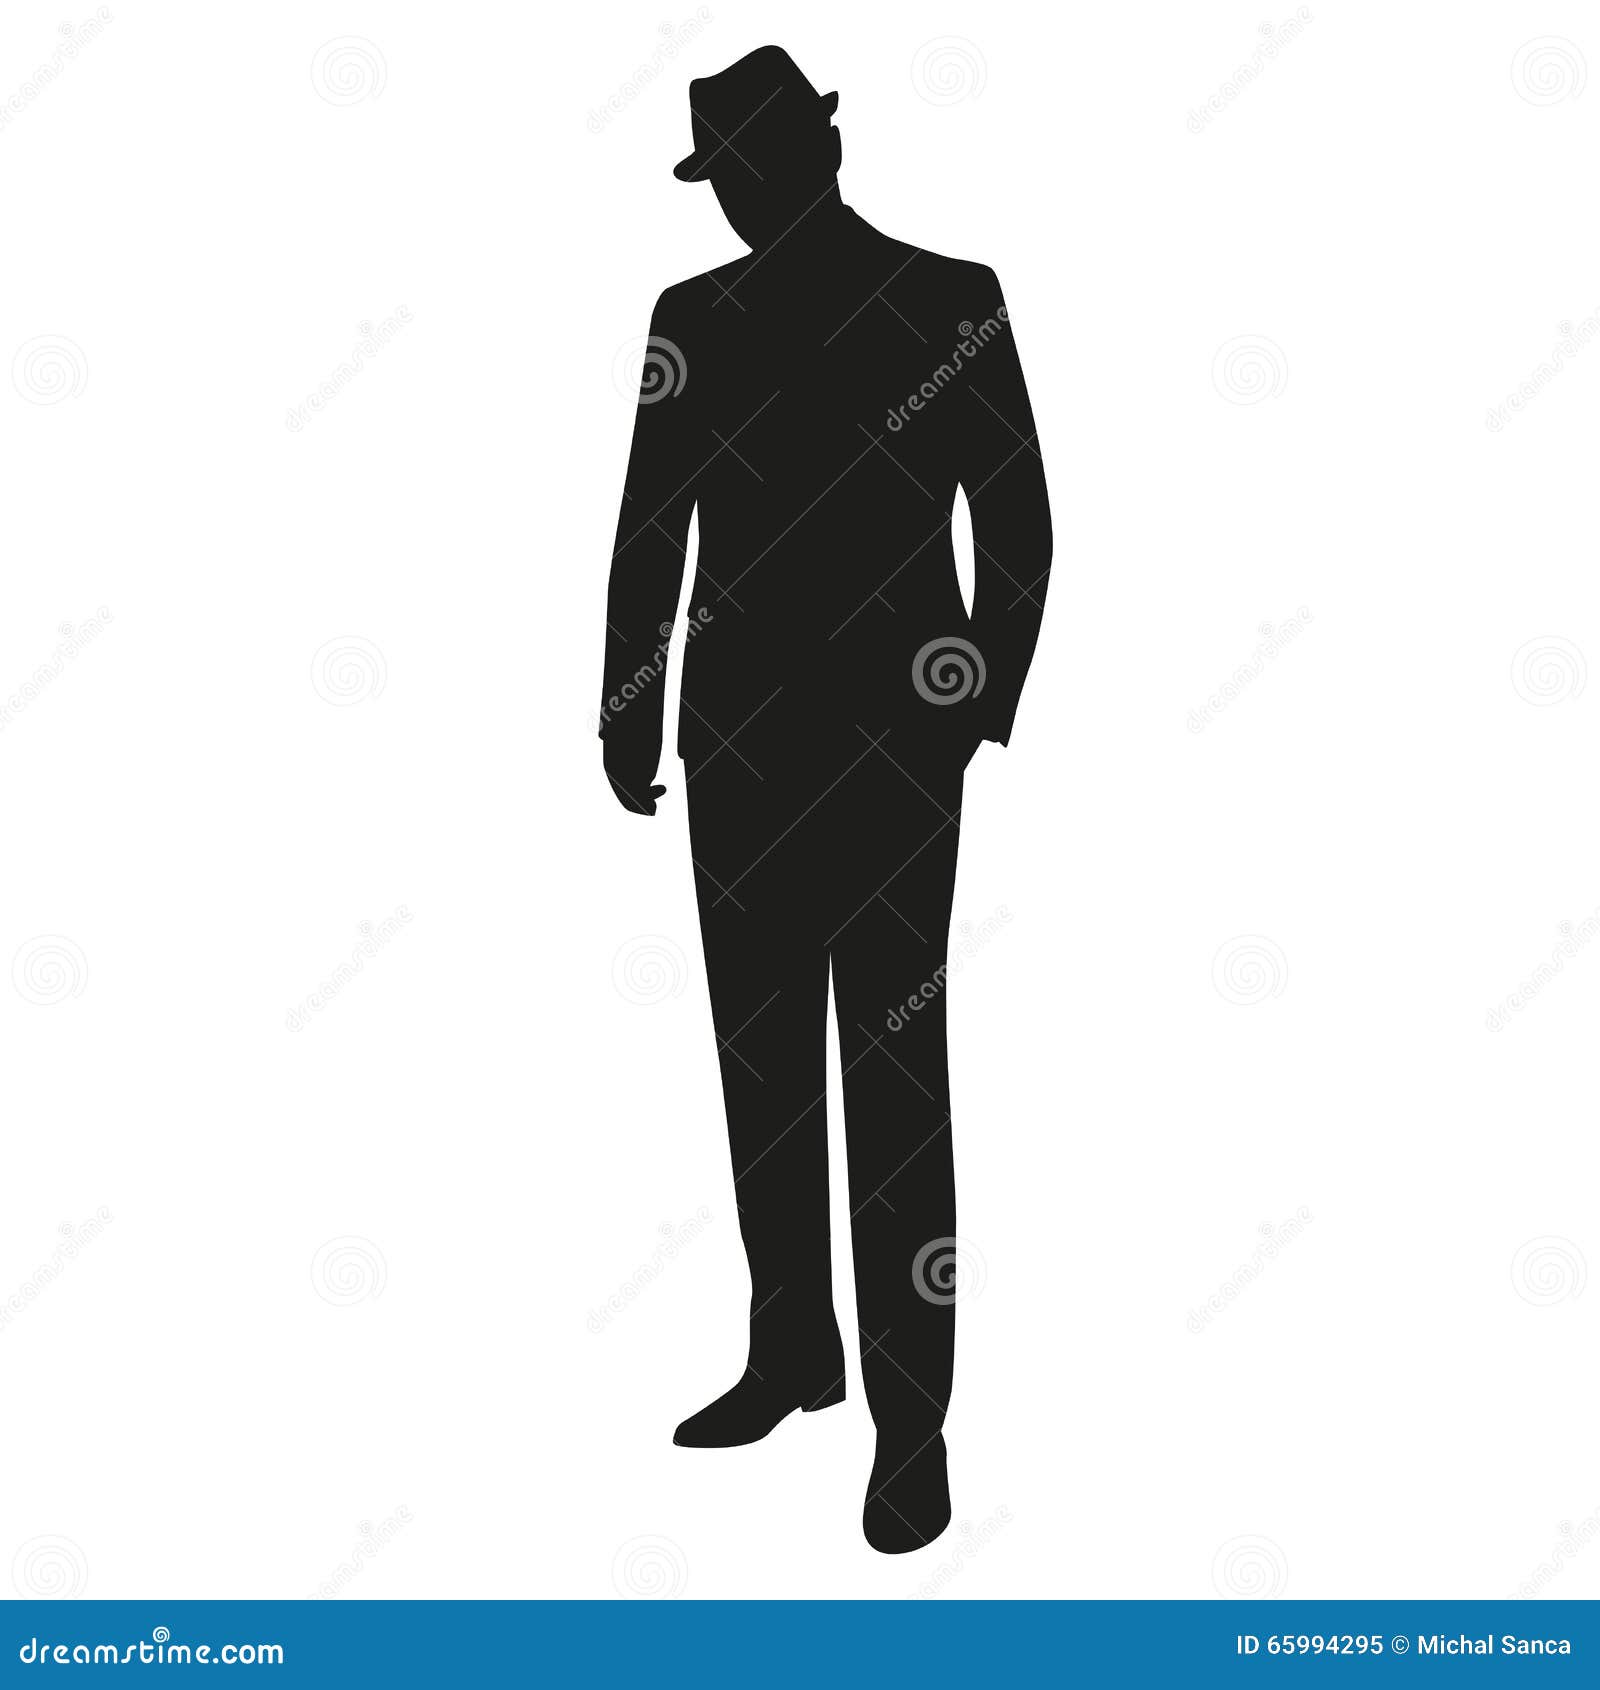 Image result for fedora silhouettes